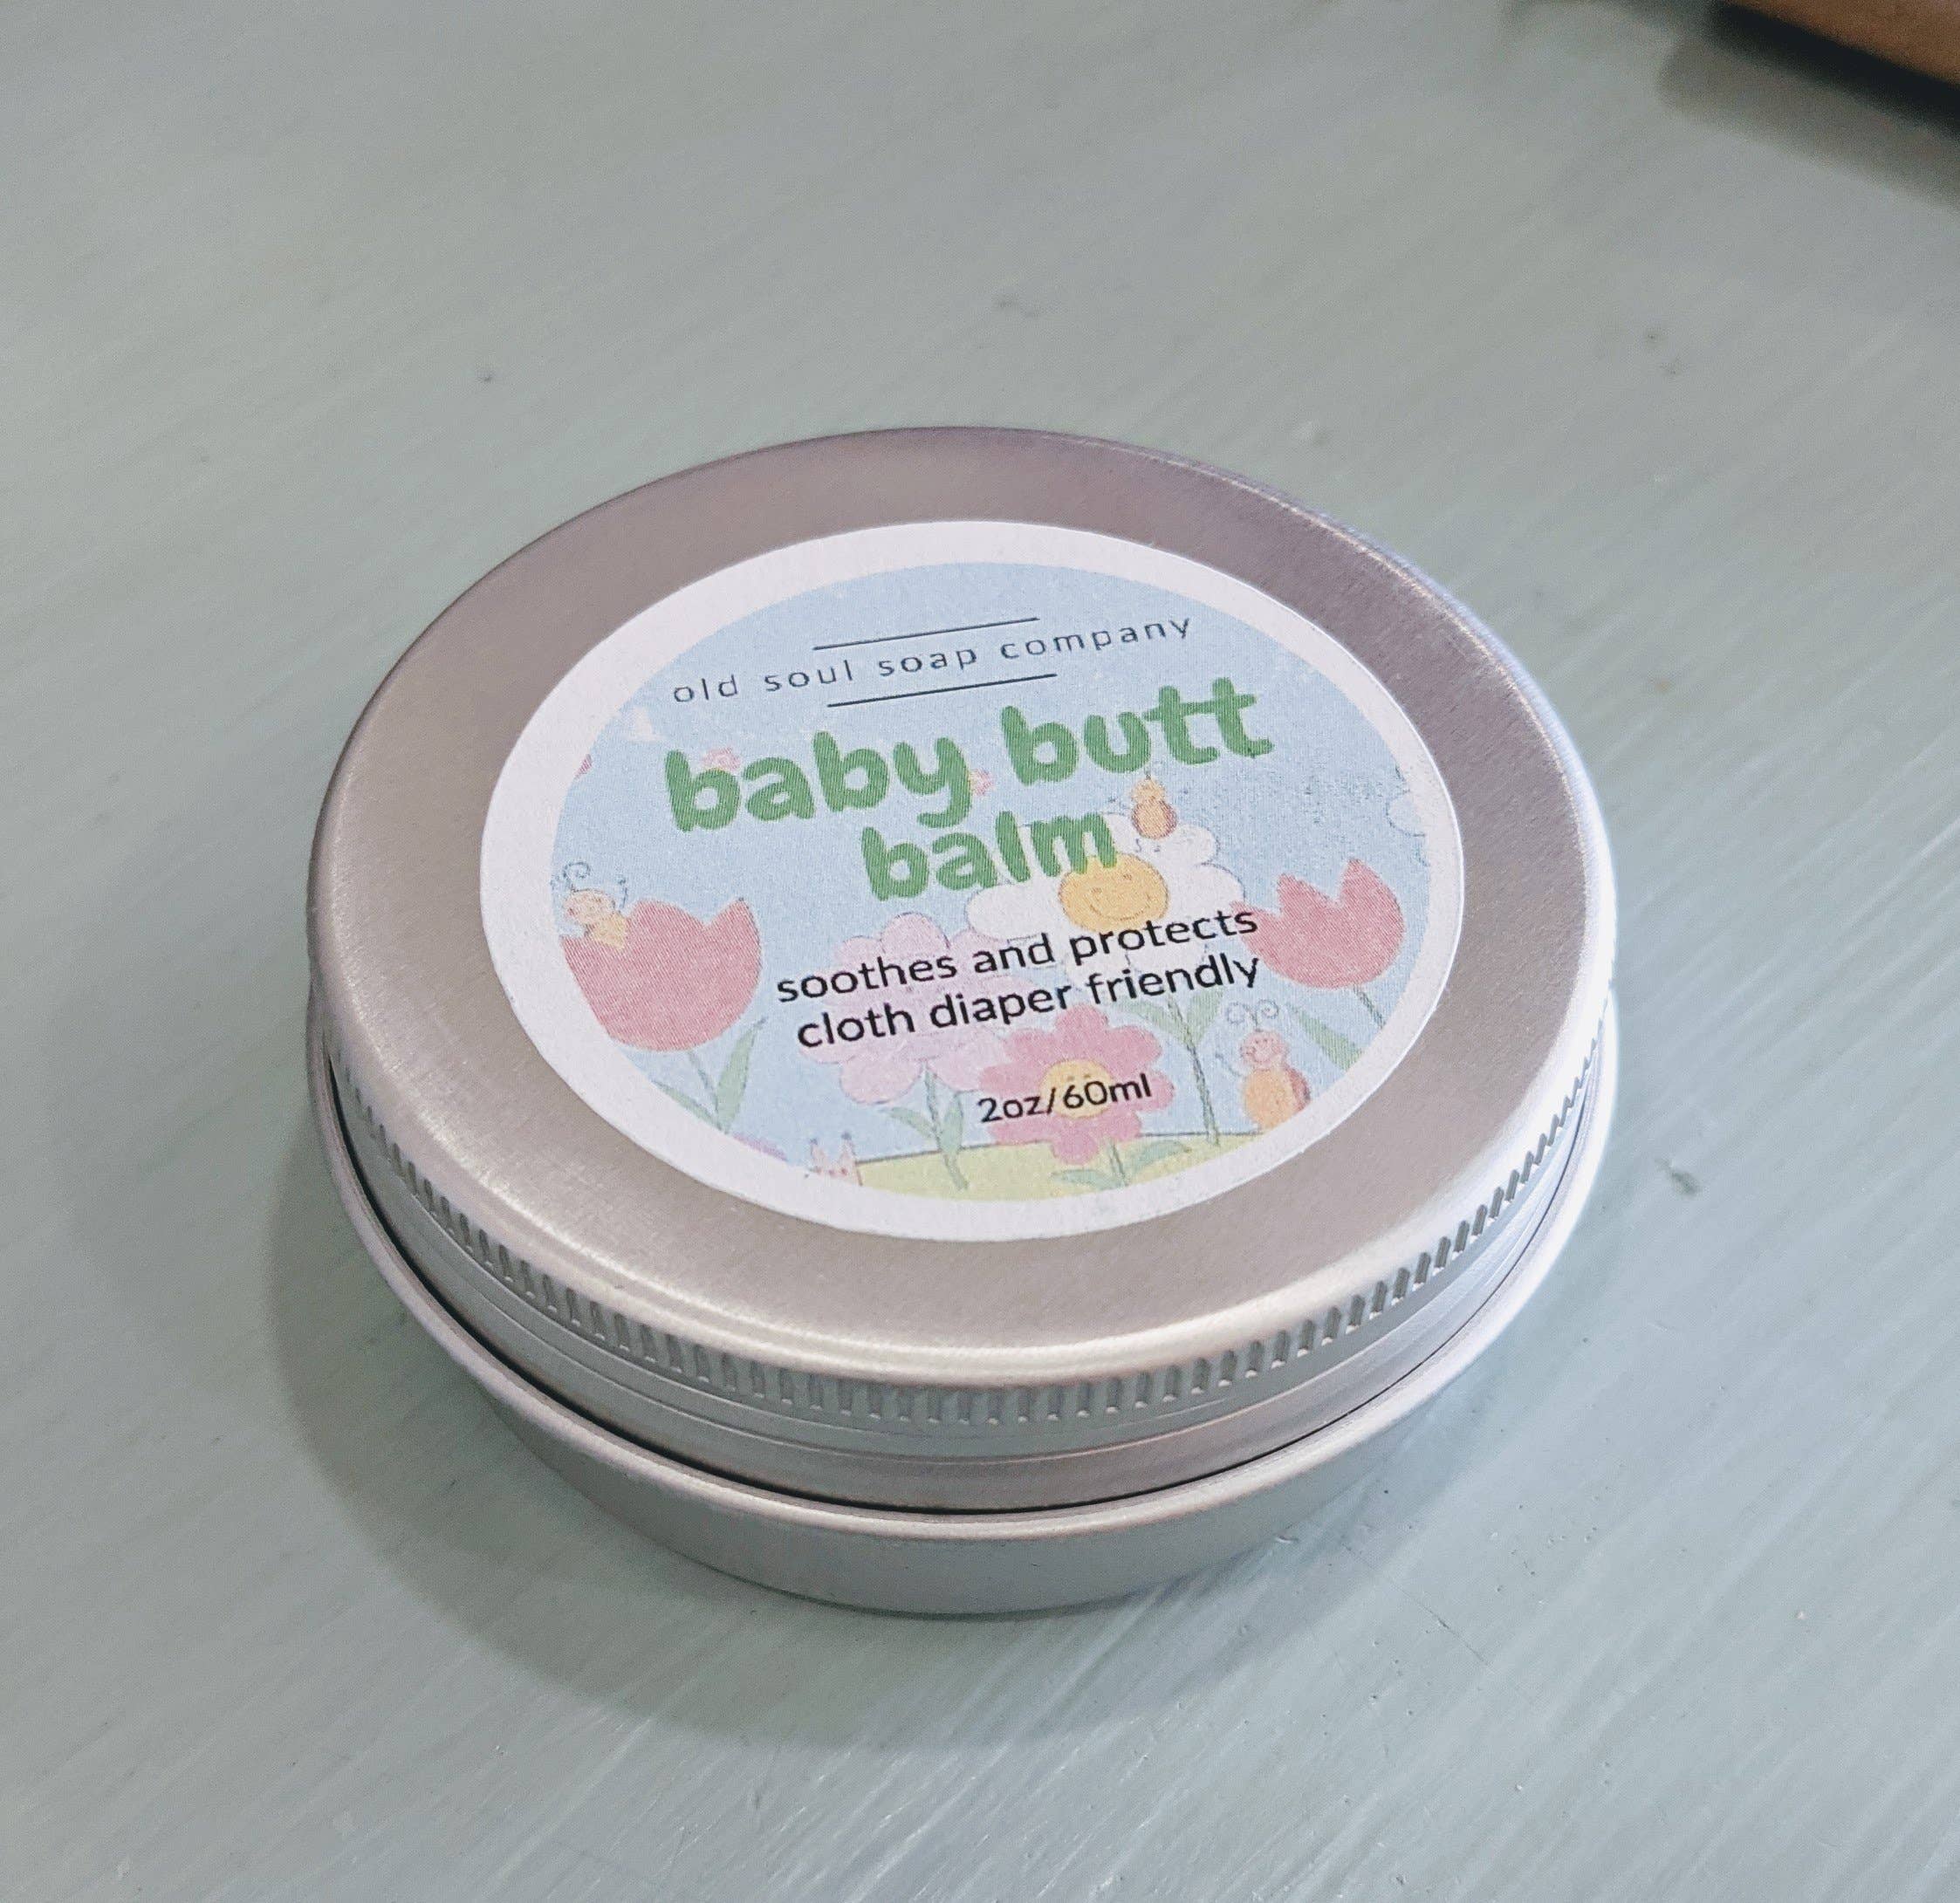 Old Soul Soap Company Inc - Baby Butt Balm